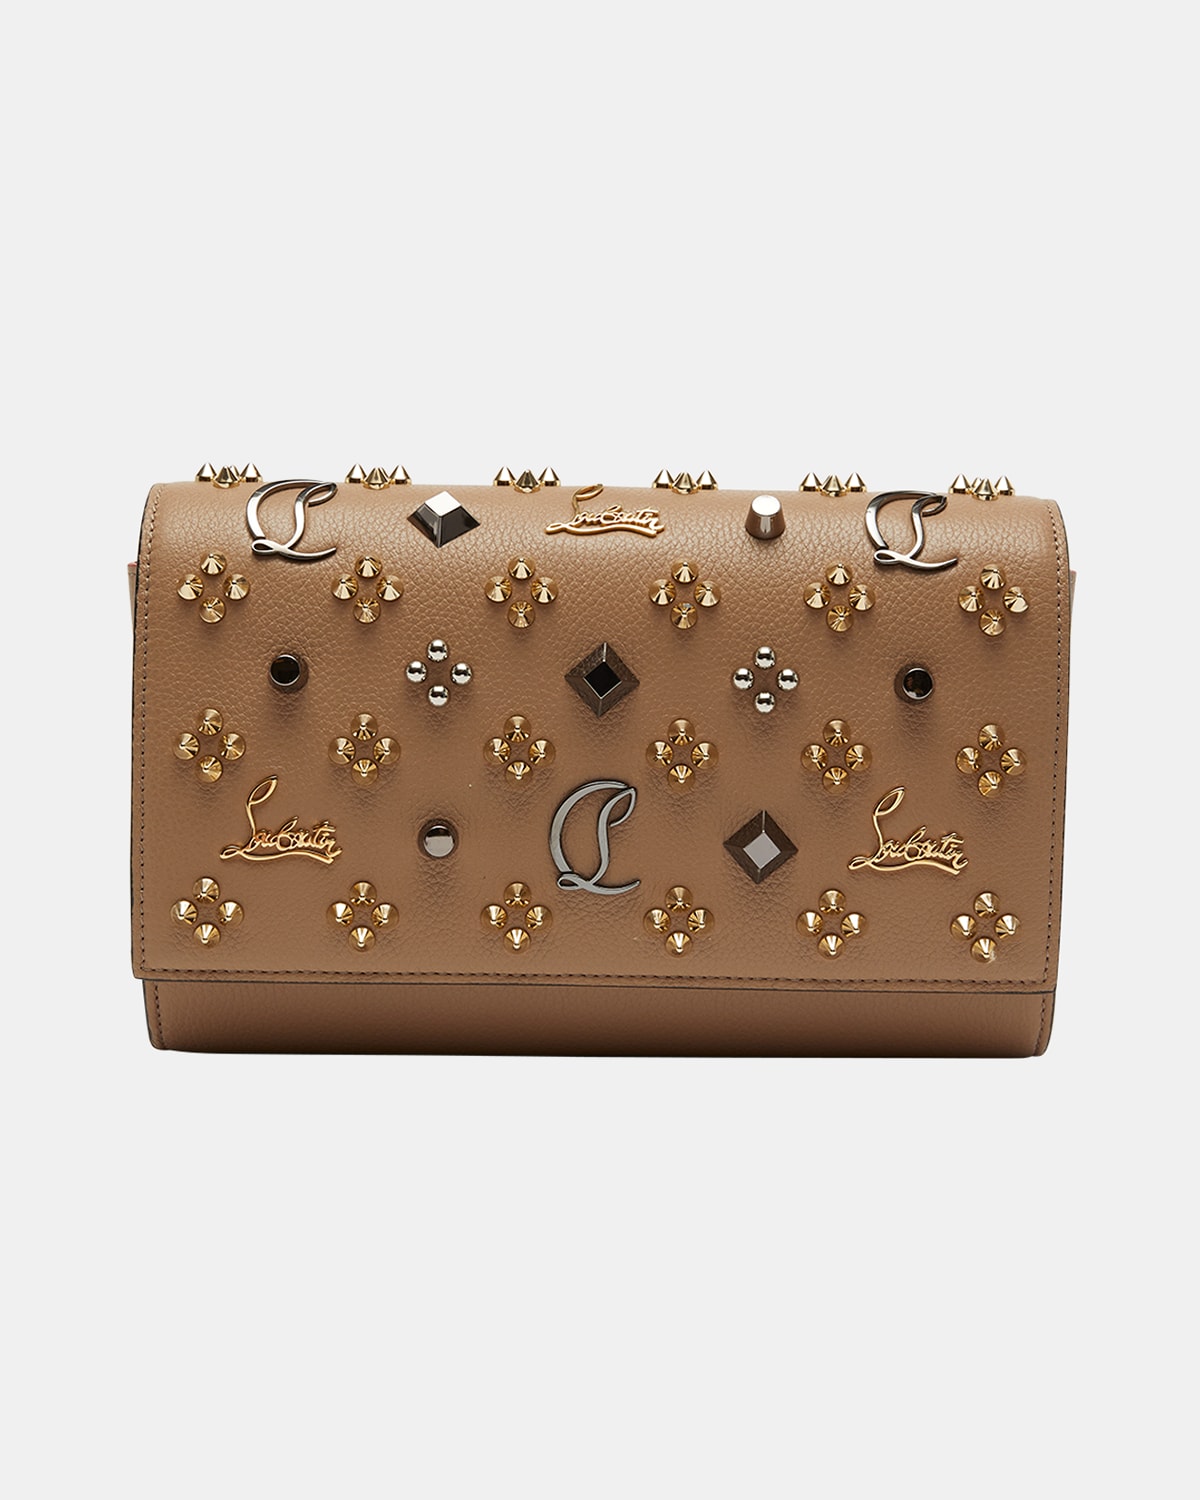 CHRISTIAN LOUBOUTIN PALOMA CLUTCH IN LEATHER WITH LOUBINTHESKY SPIKES